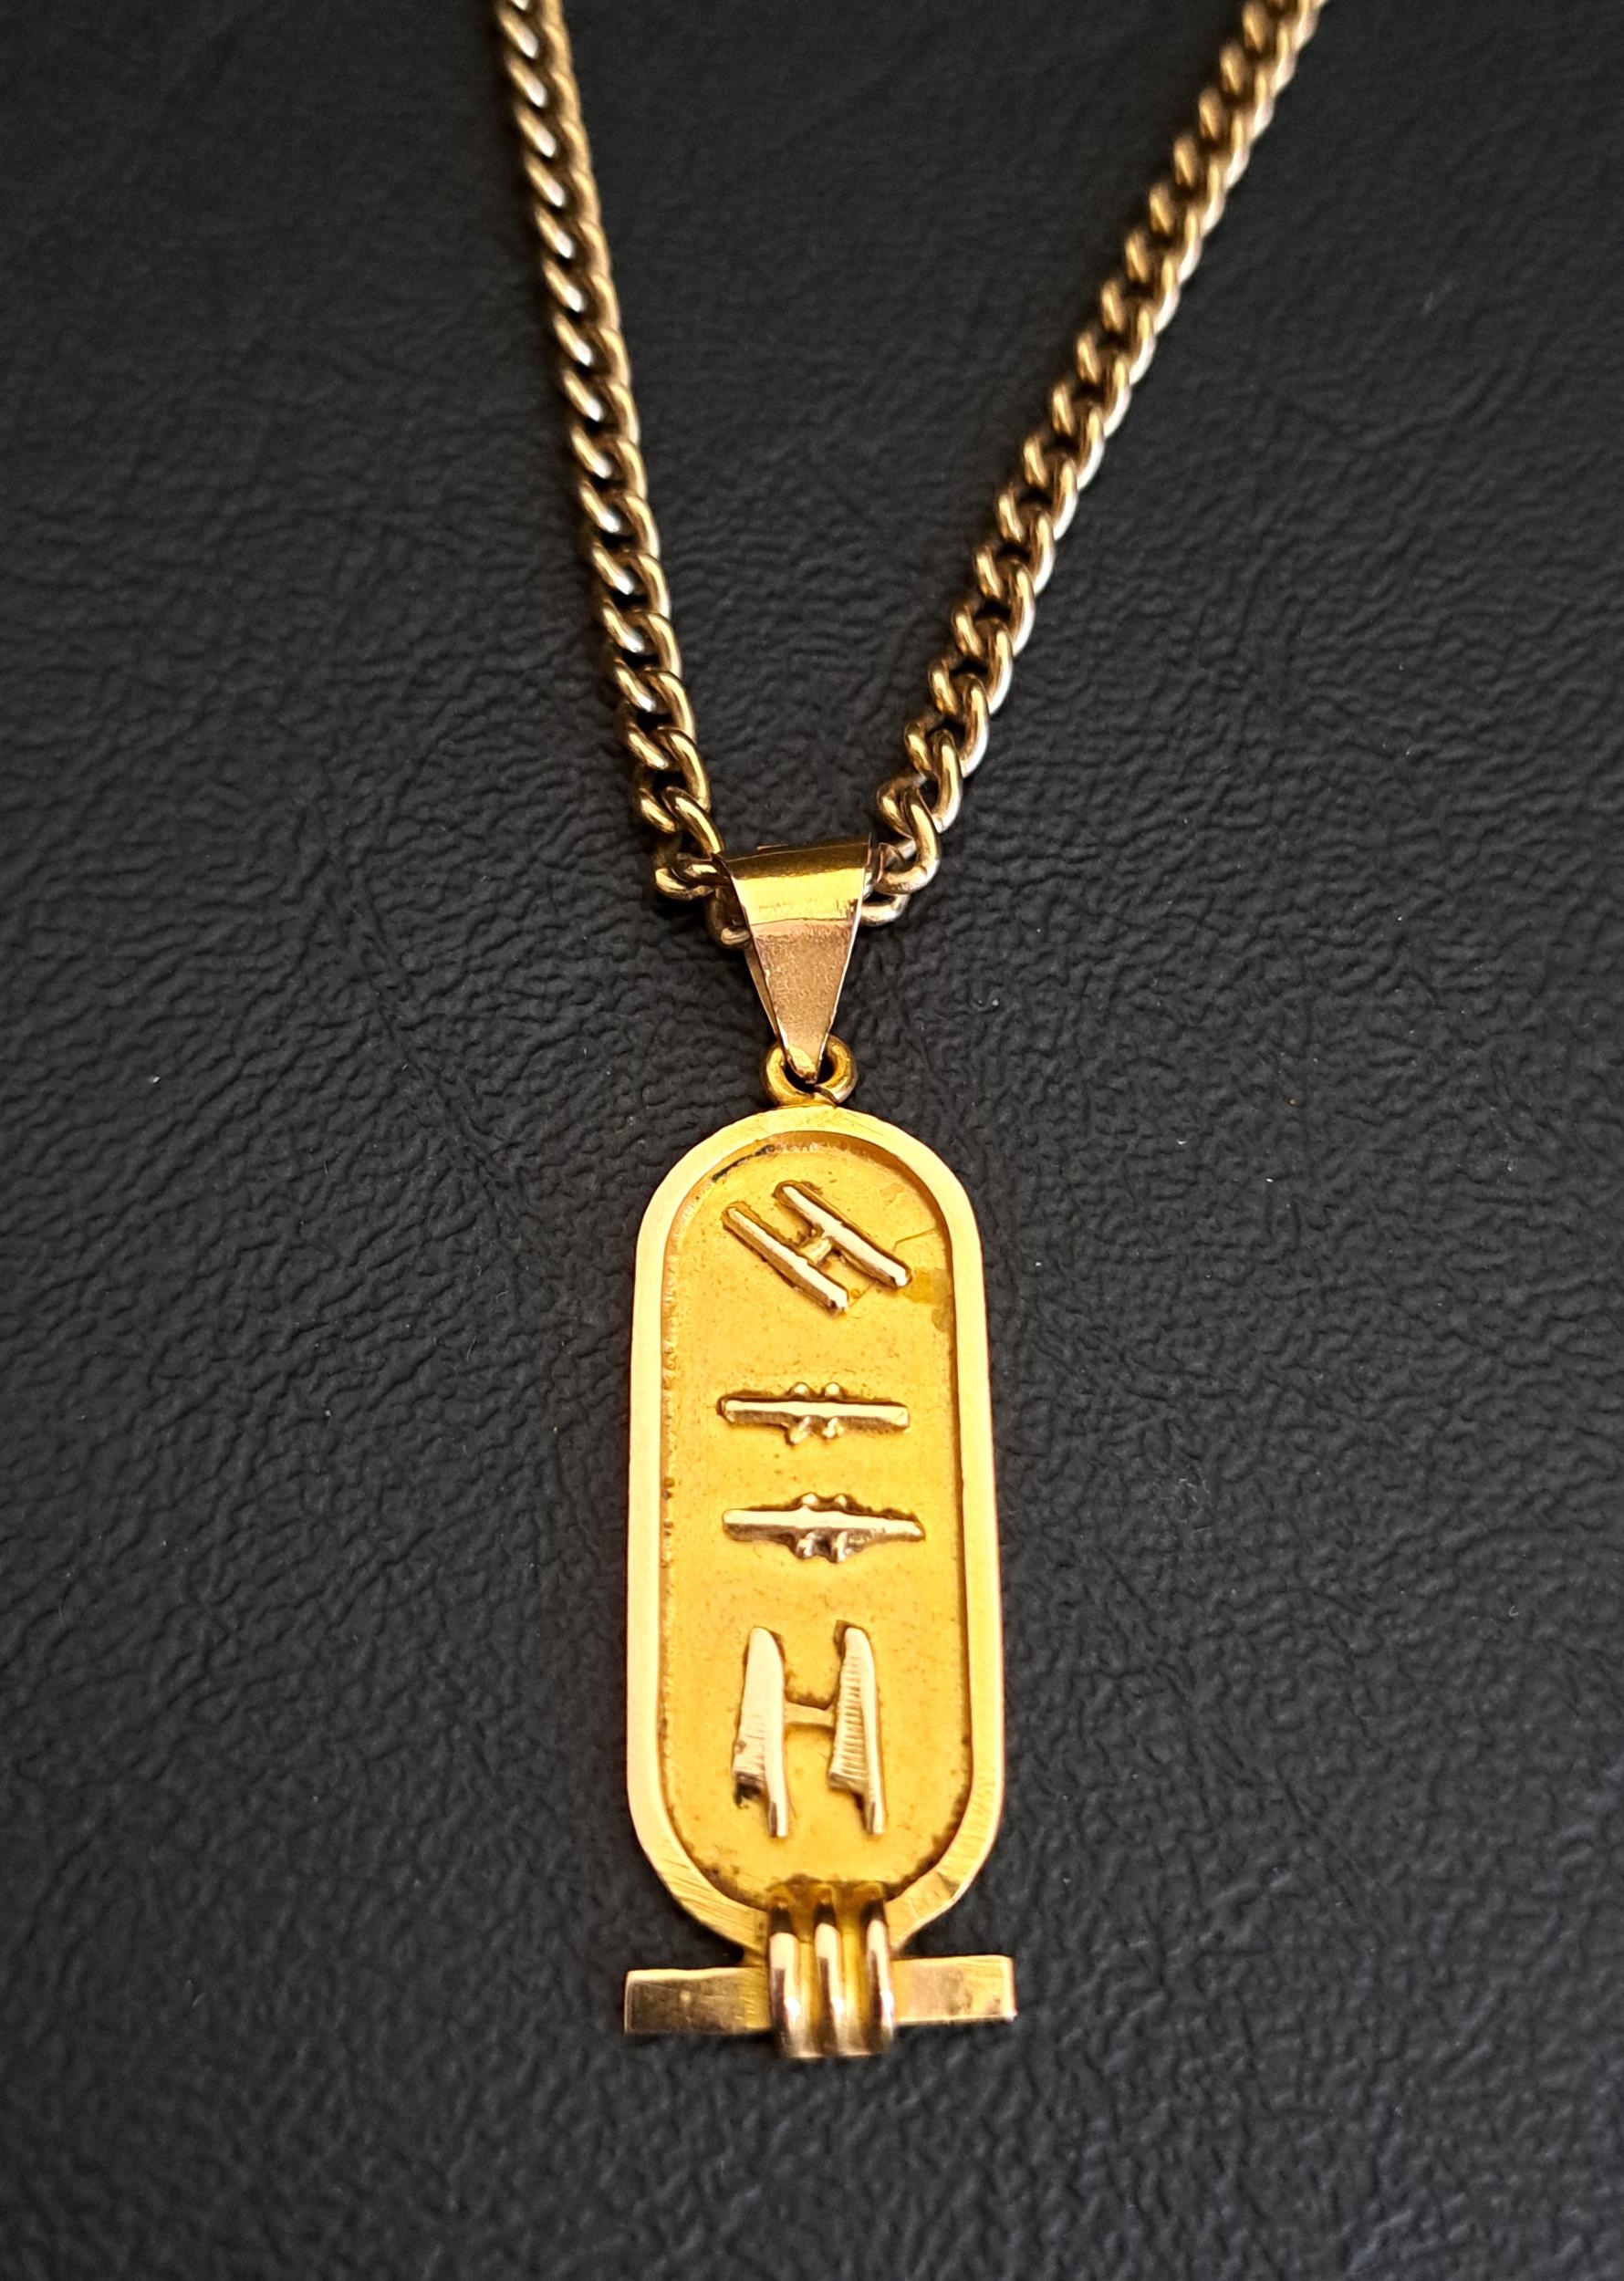 EGYPTIAN EIGHTEEN CARAT GOLD PENDANT decorated with hieroglyphs, 4.2cm high and approximately 3.6